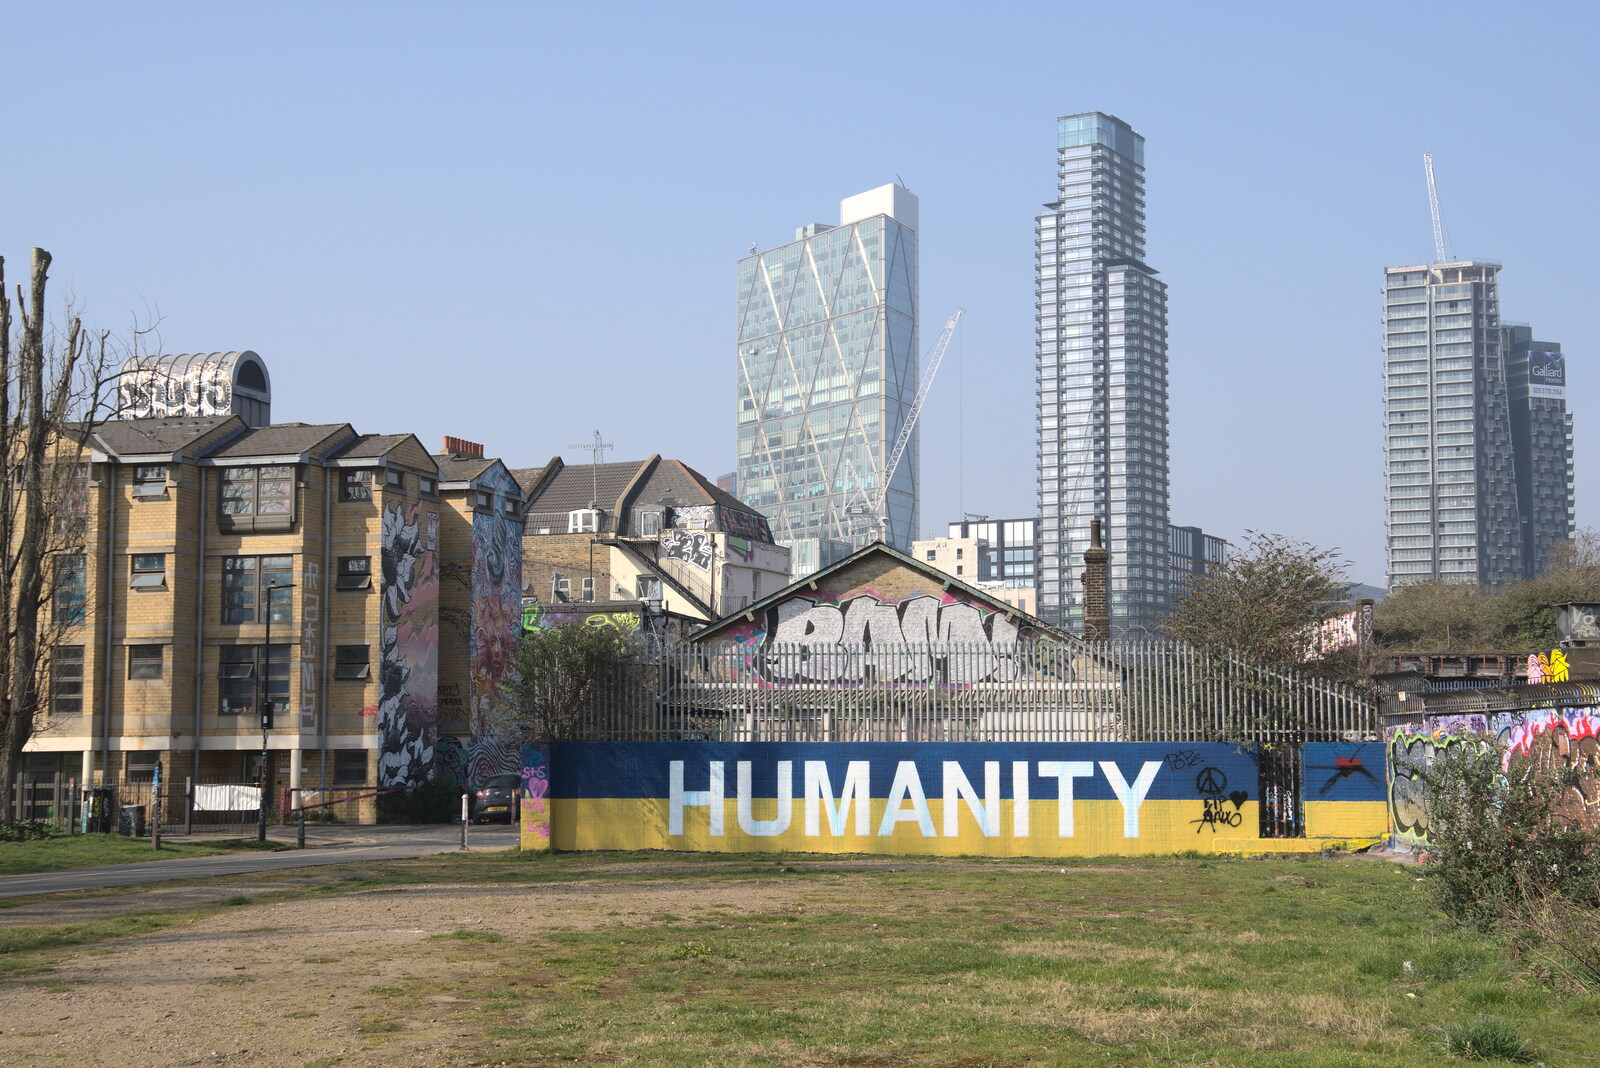 A Walk Around the South Bank, London - 25th March 2022: Graffiti for Ukraine